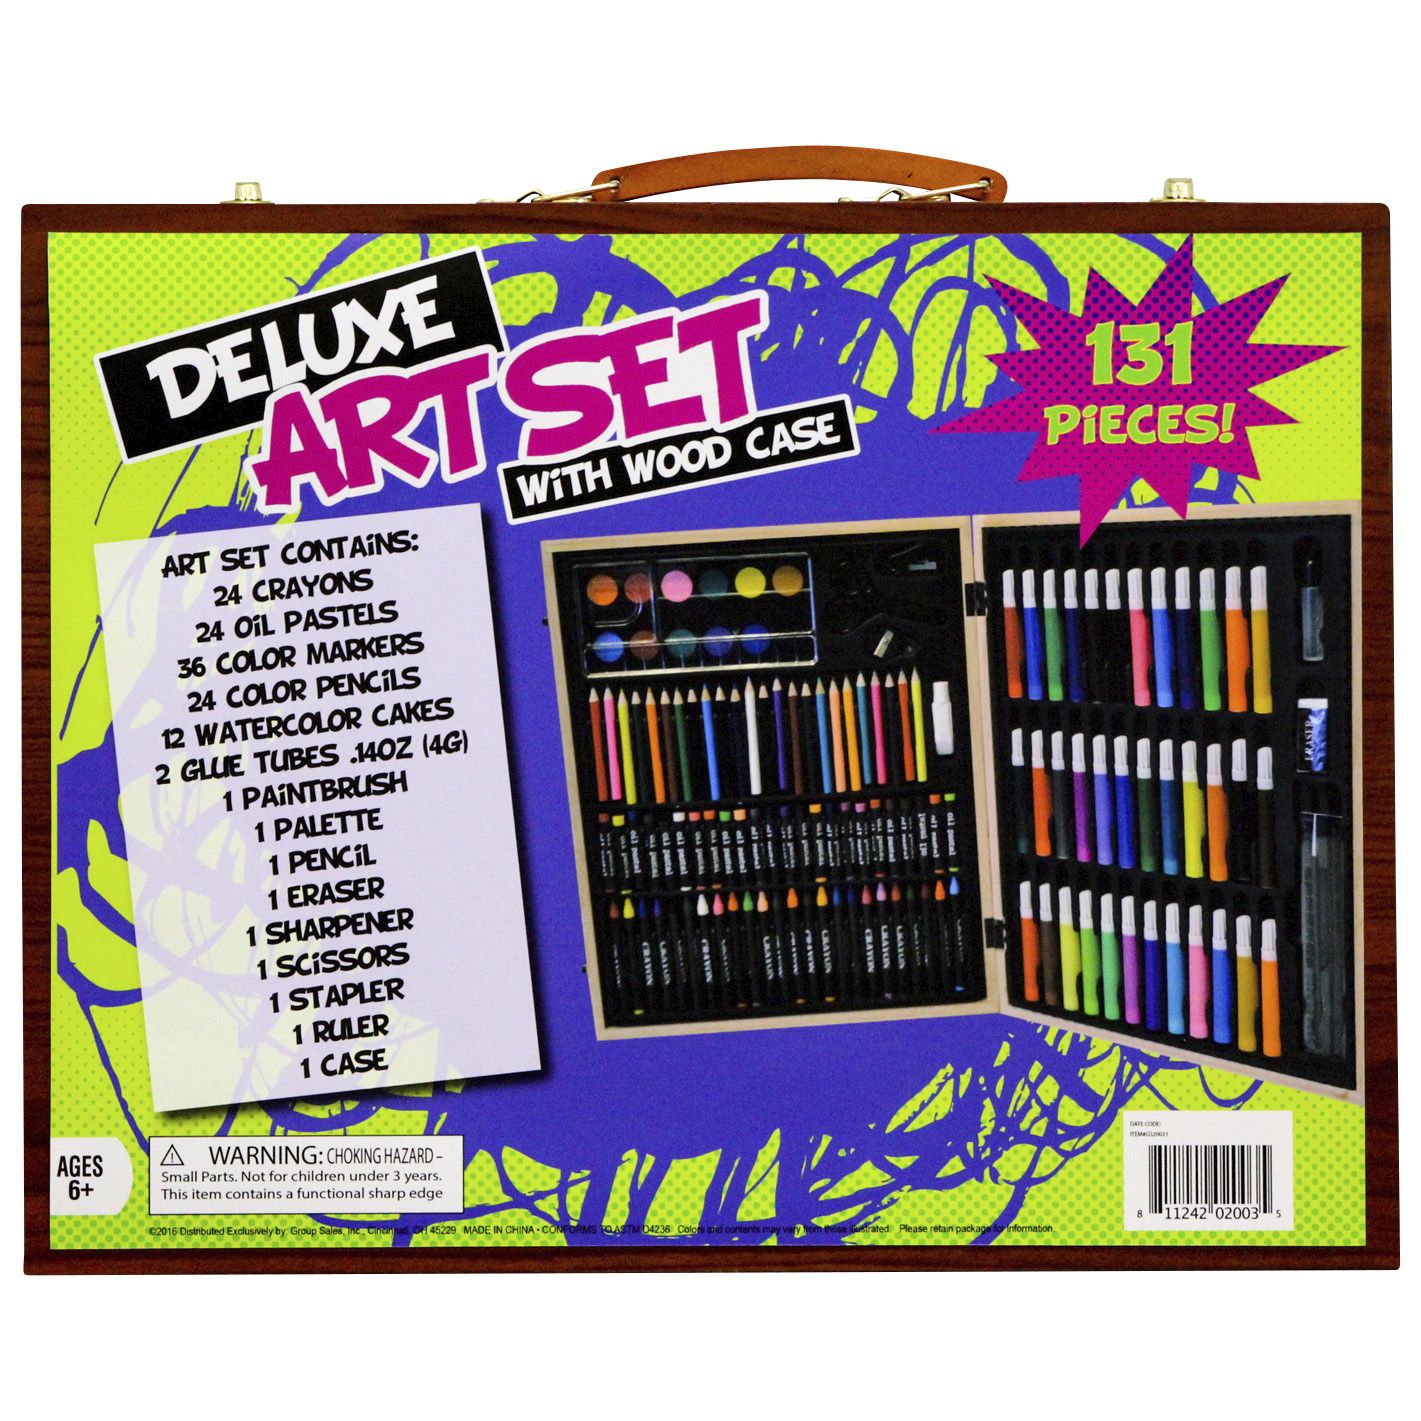 Art Set, 131 Pieces Color Pencils, Oil Pastels, Watercolor Cakes, Paint  Brushes, Drawing Pencils, Markers, Crayons, Palette, and More 